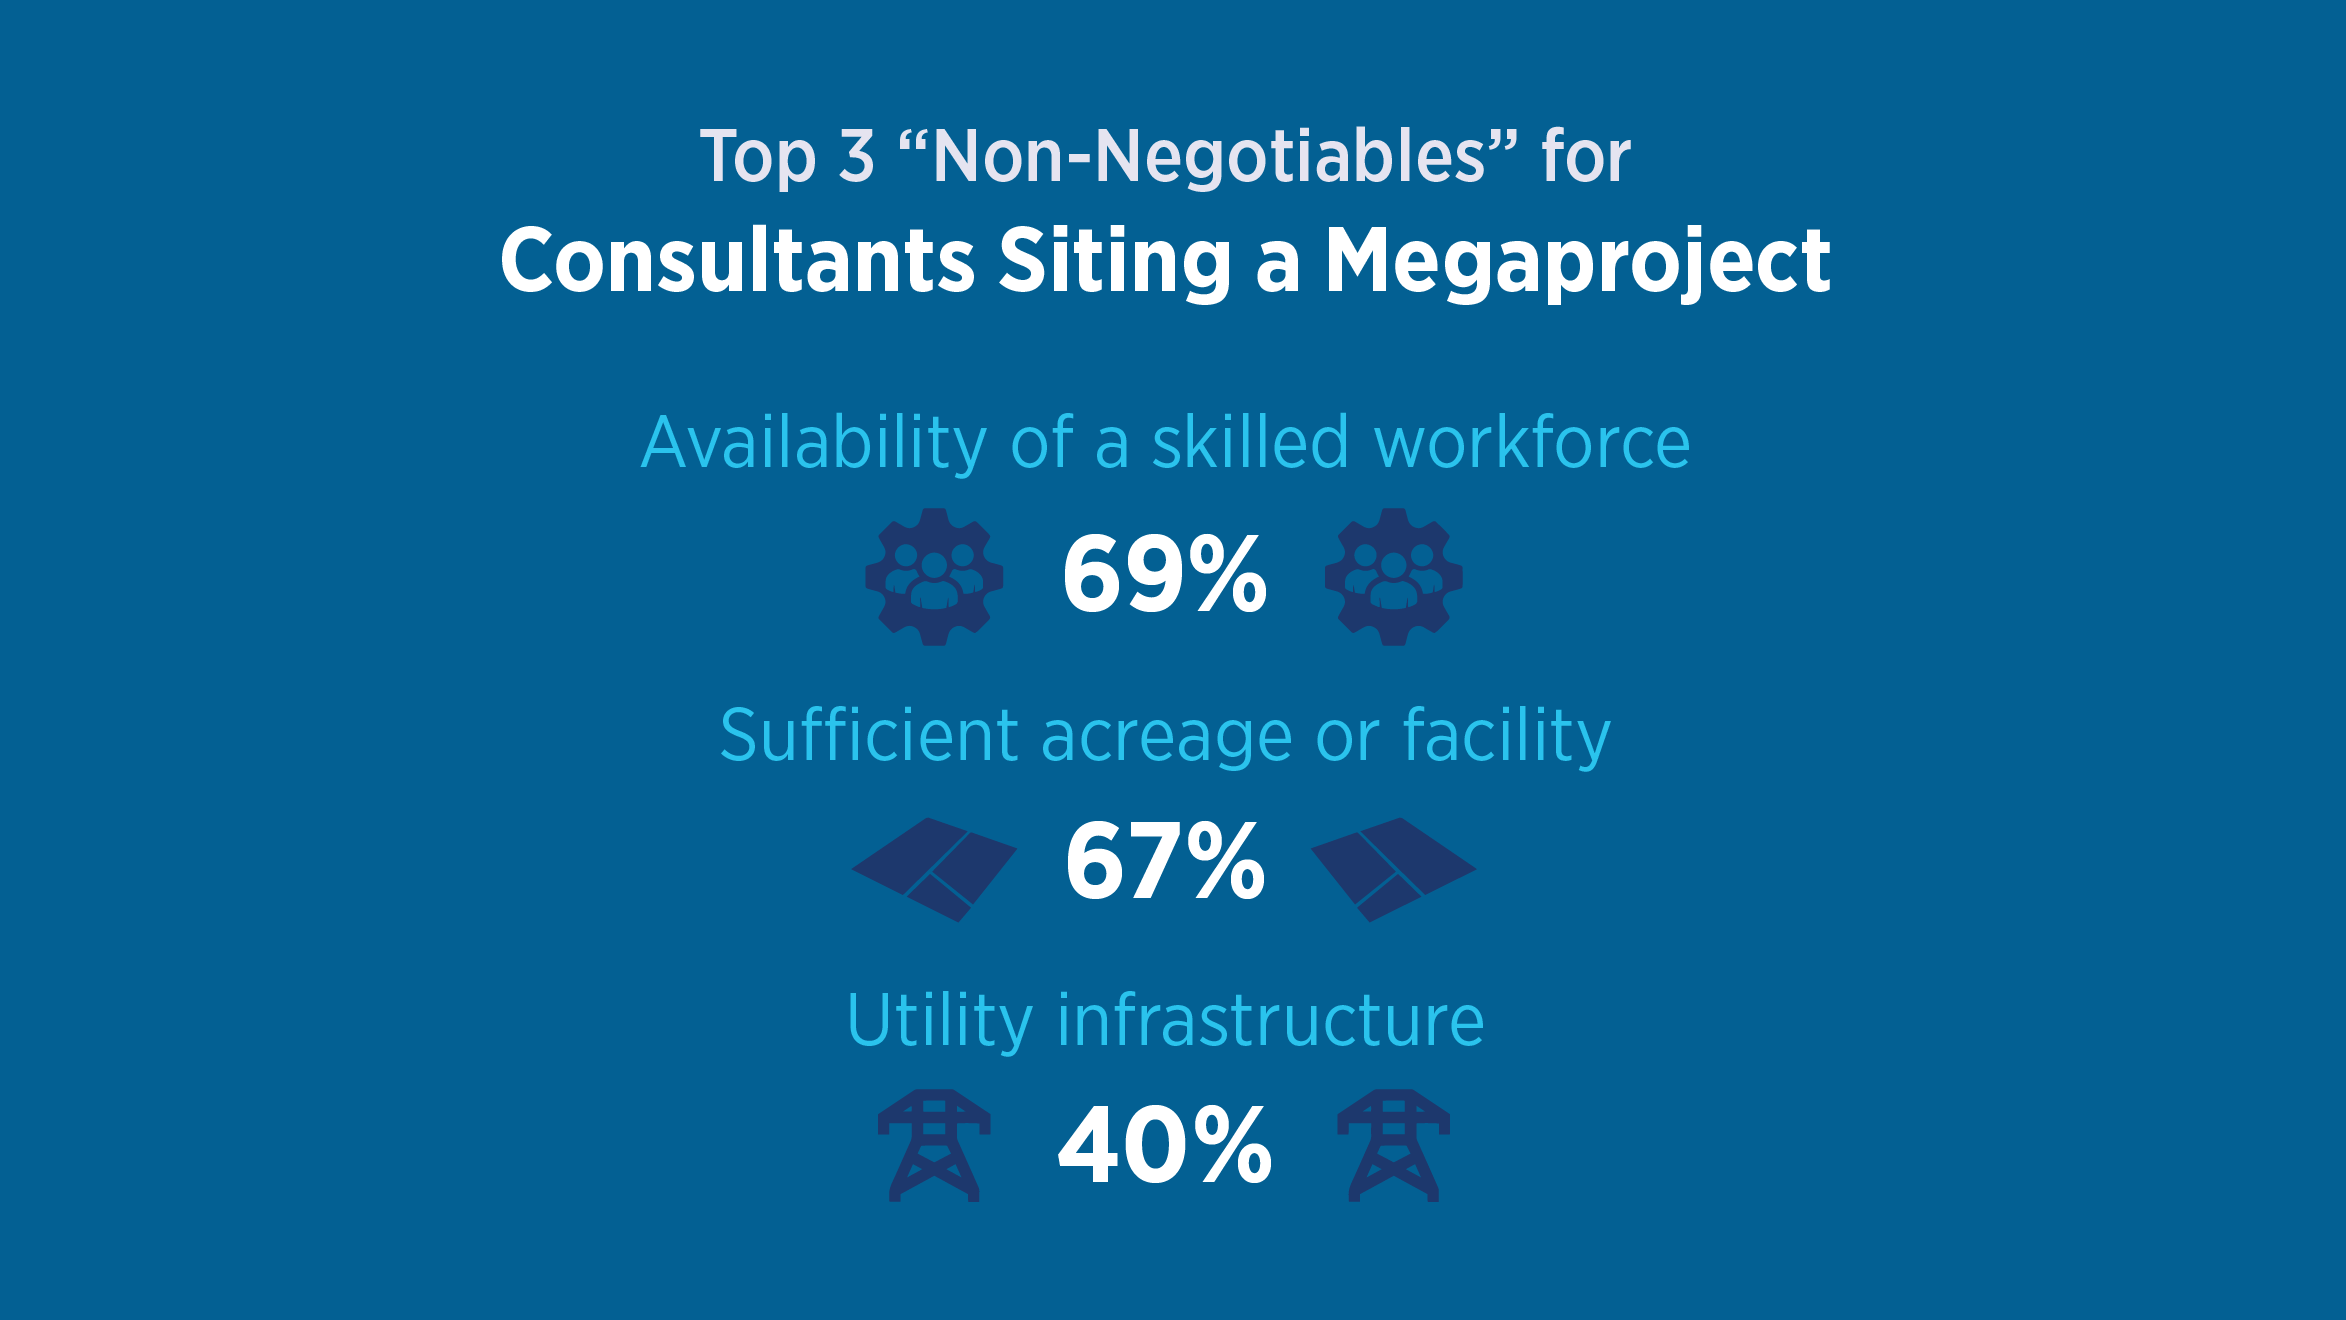 Graphic showing workforce, available acreage and facilities, and utility infrastructure are the non-negotiable factors of a megaproject